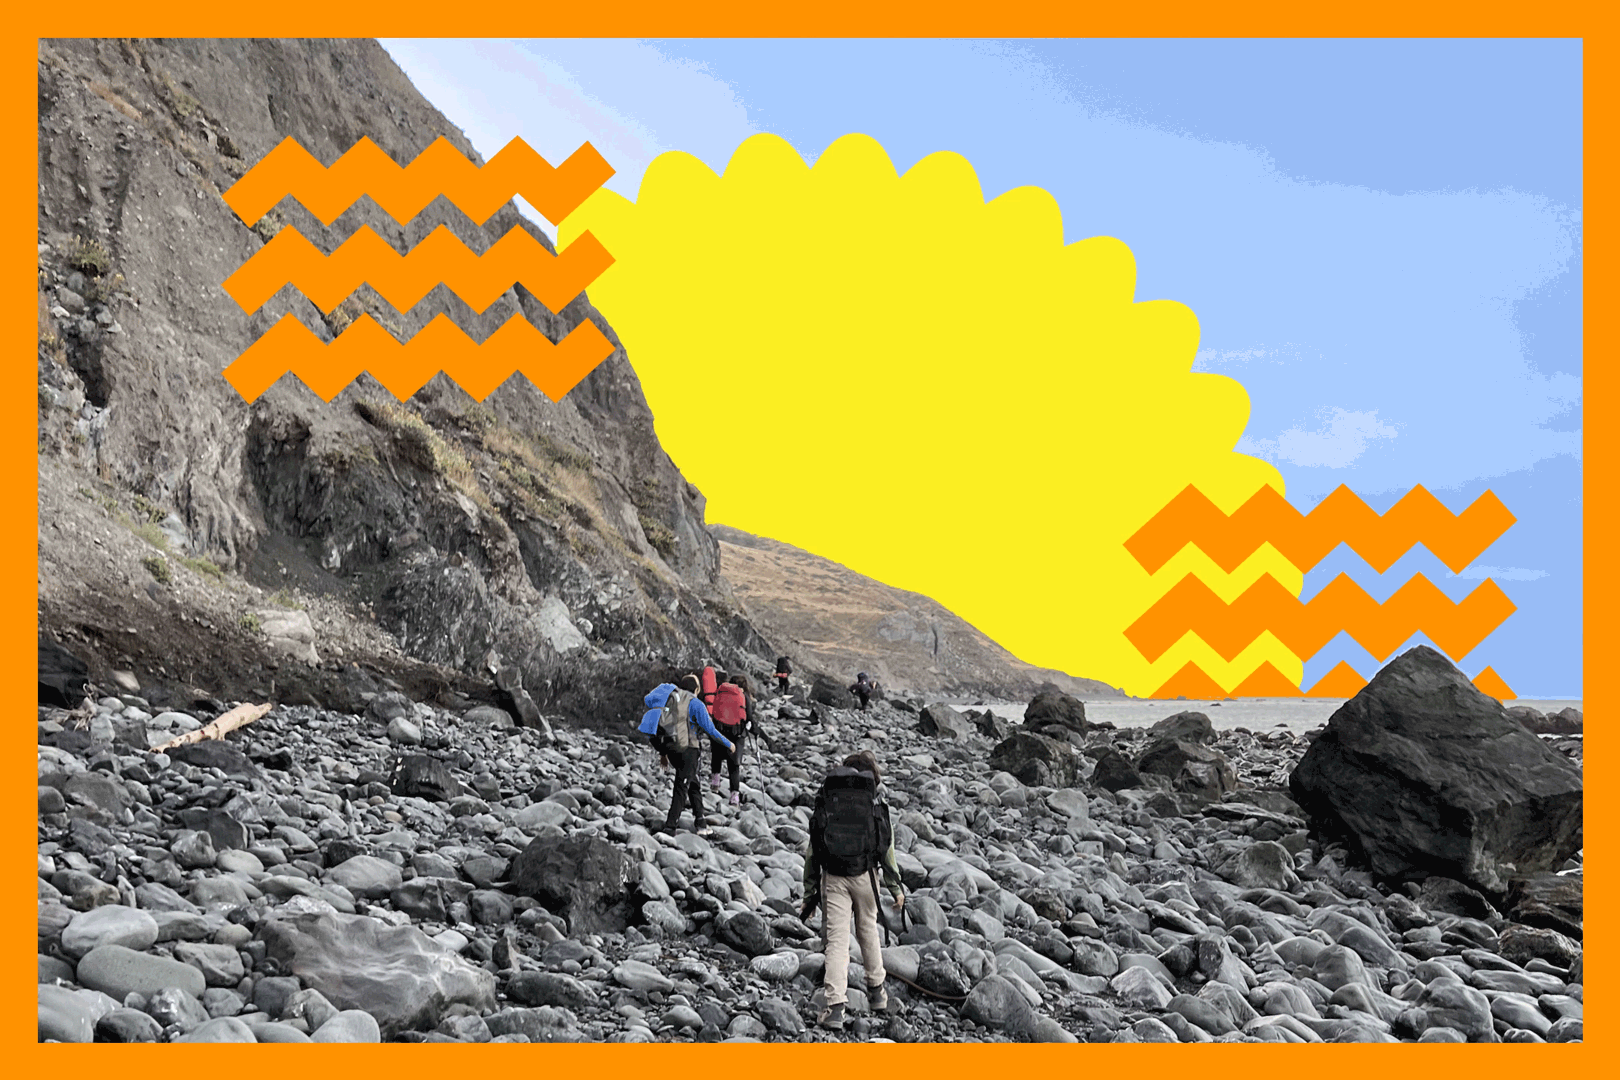 Hikers walk on the rocky beach of the Lost Coast